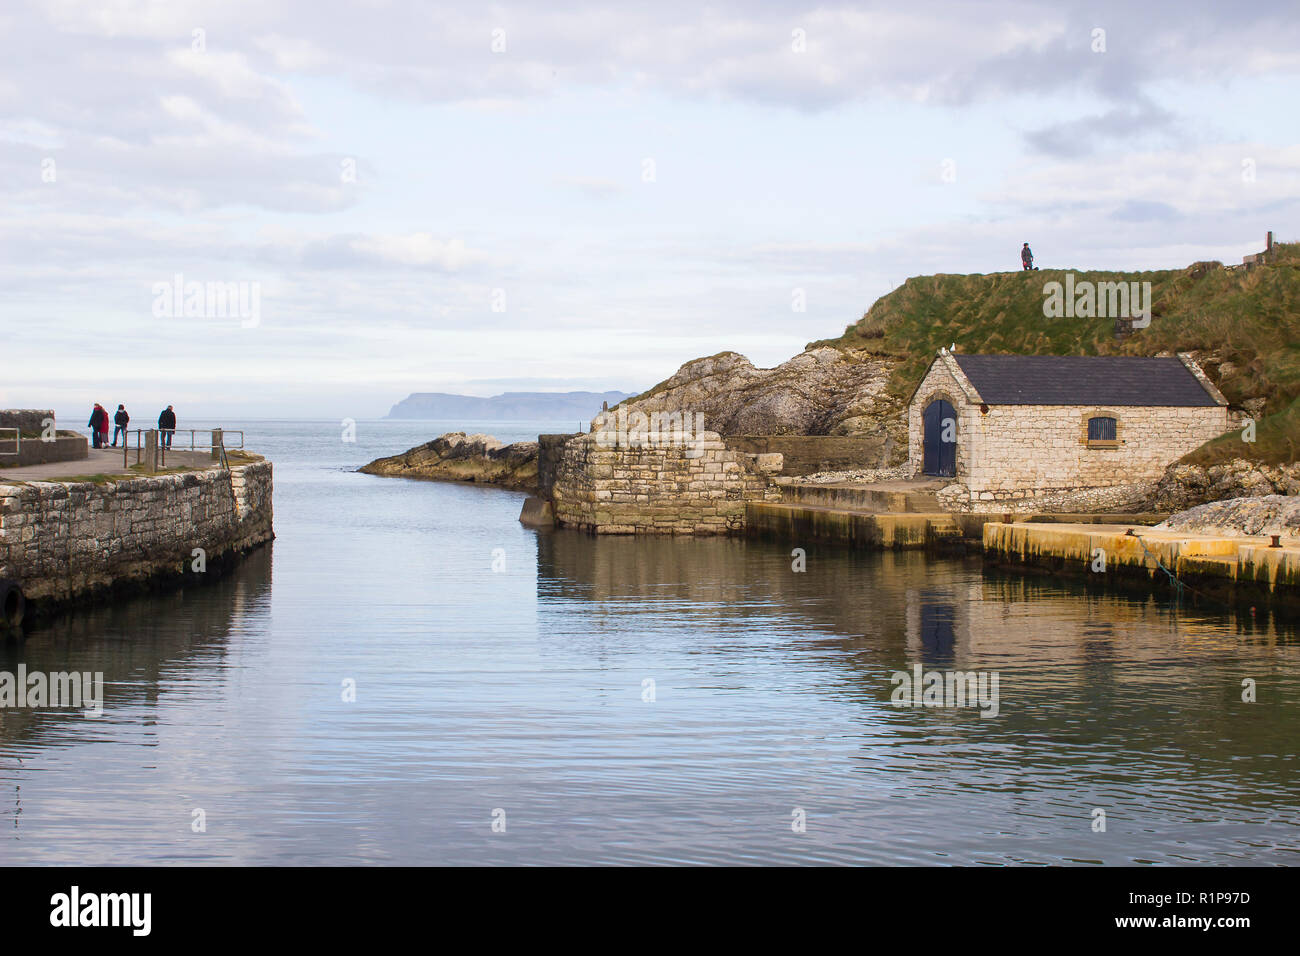 The small harbor at Ballintoy on the North Antrim Coast of Northern Ireland with its ancient stone built boathouse on a day in spring Stock Photo